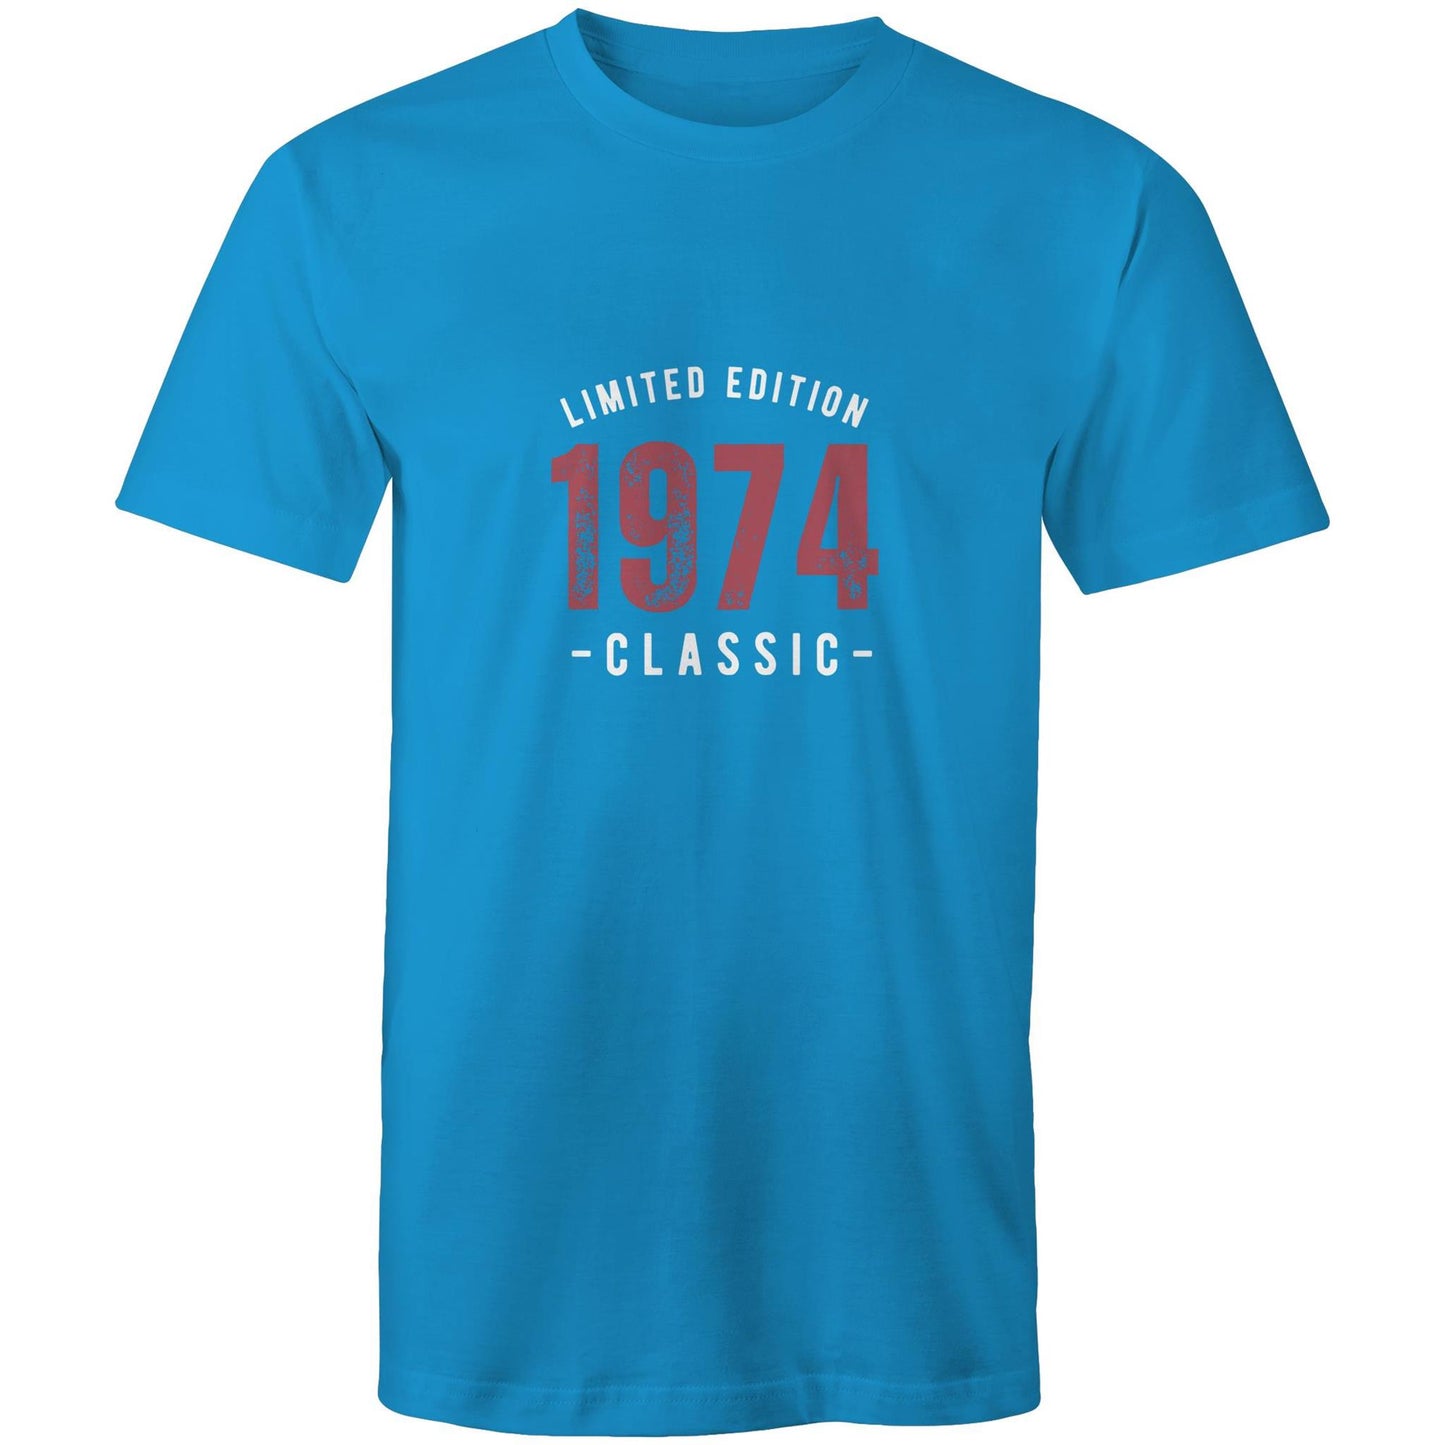 Limited Edition 1974 Classic - Mens T-Shirt